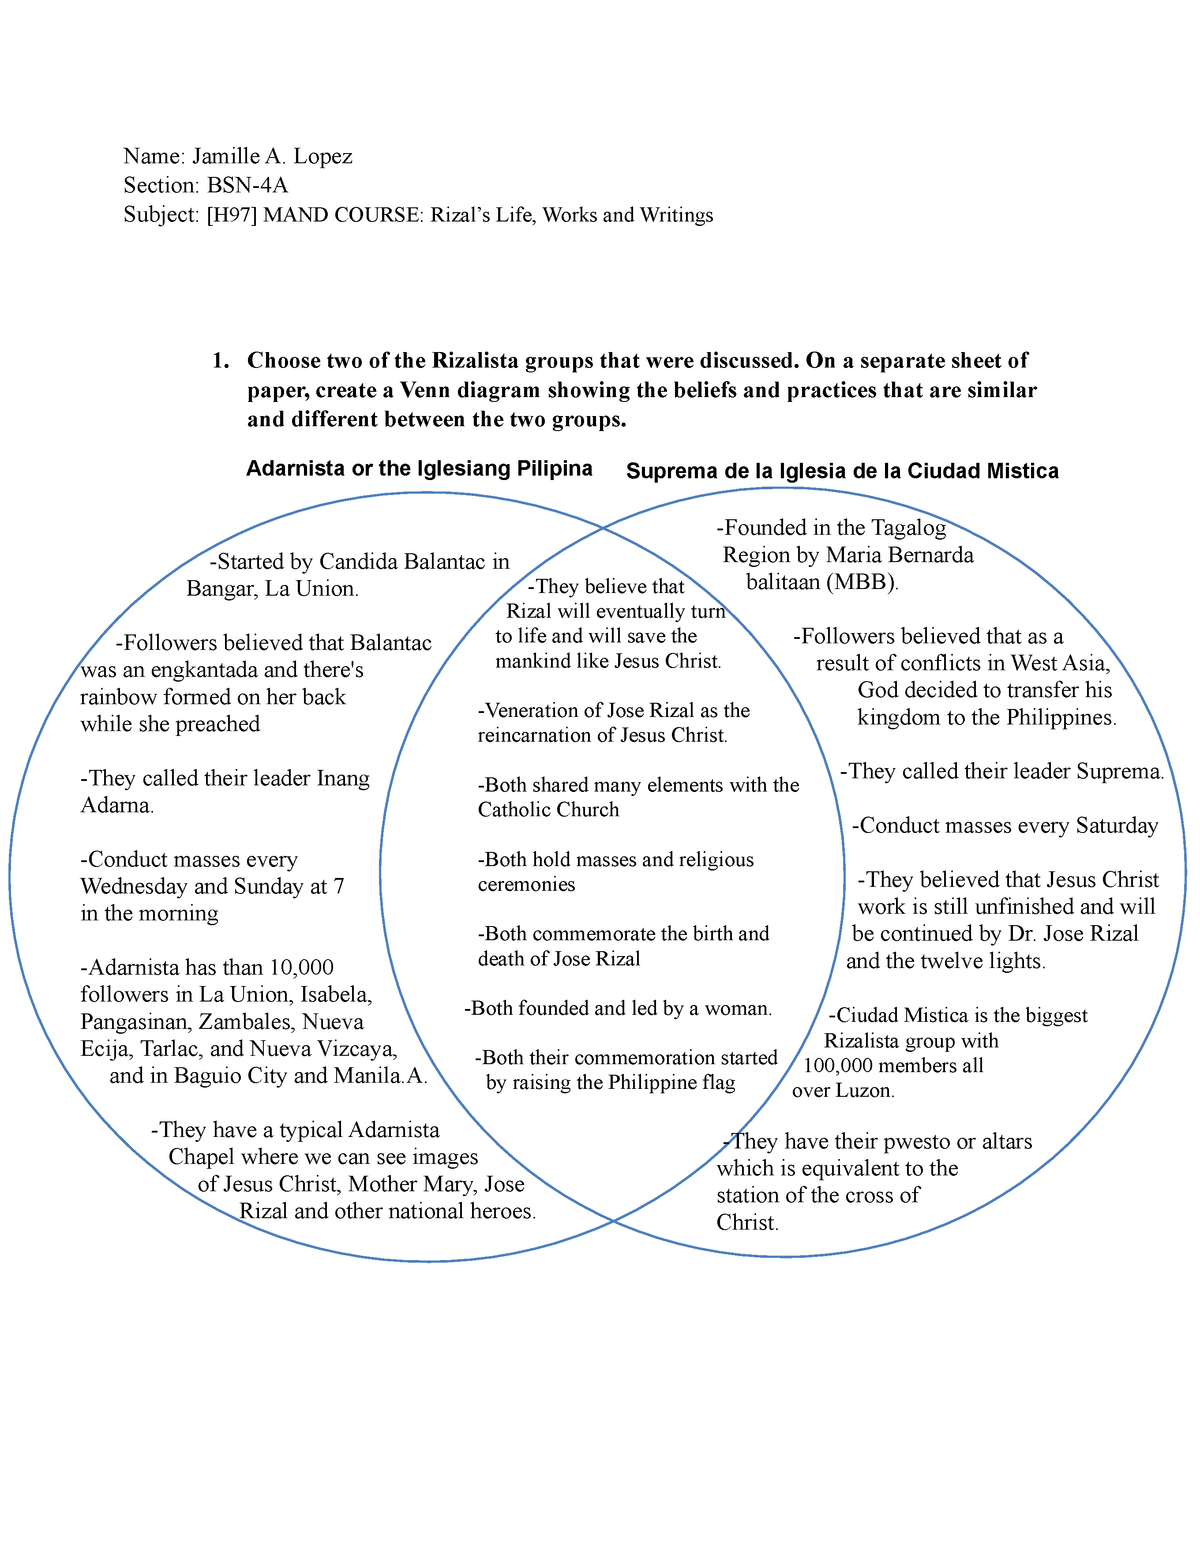 activity-3-rizal-s-life-venn-diagram-showing-the-beliefs-and-practices